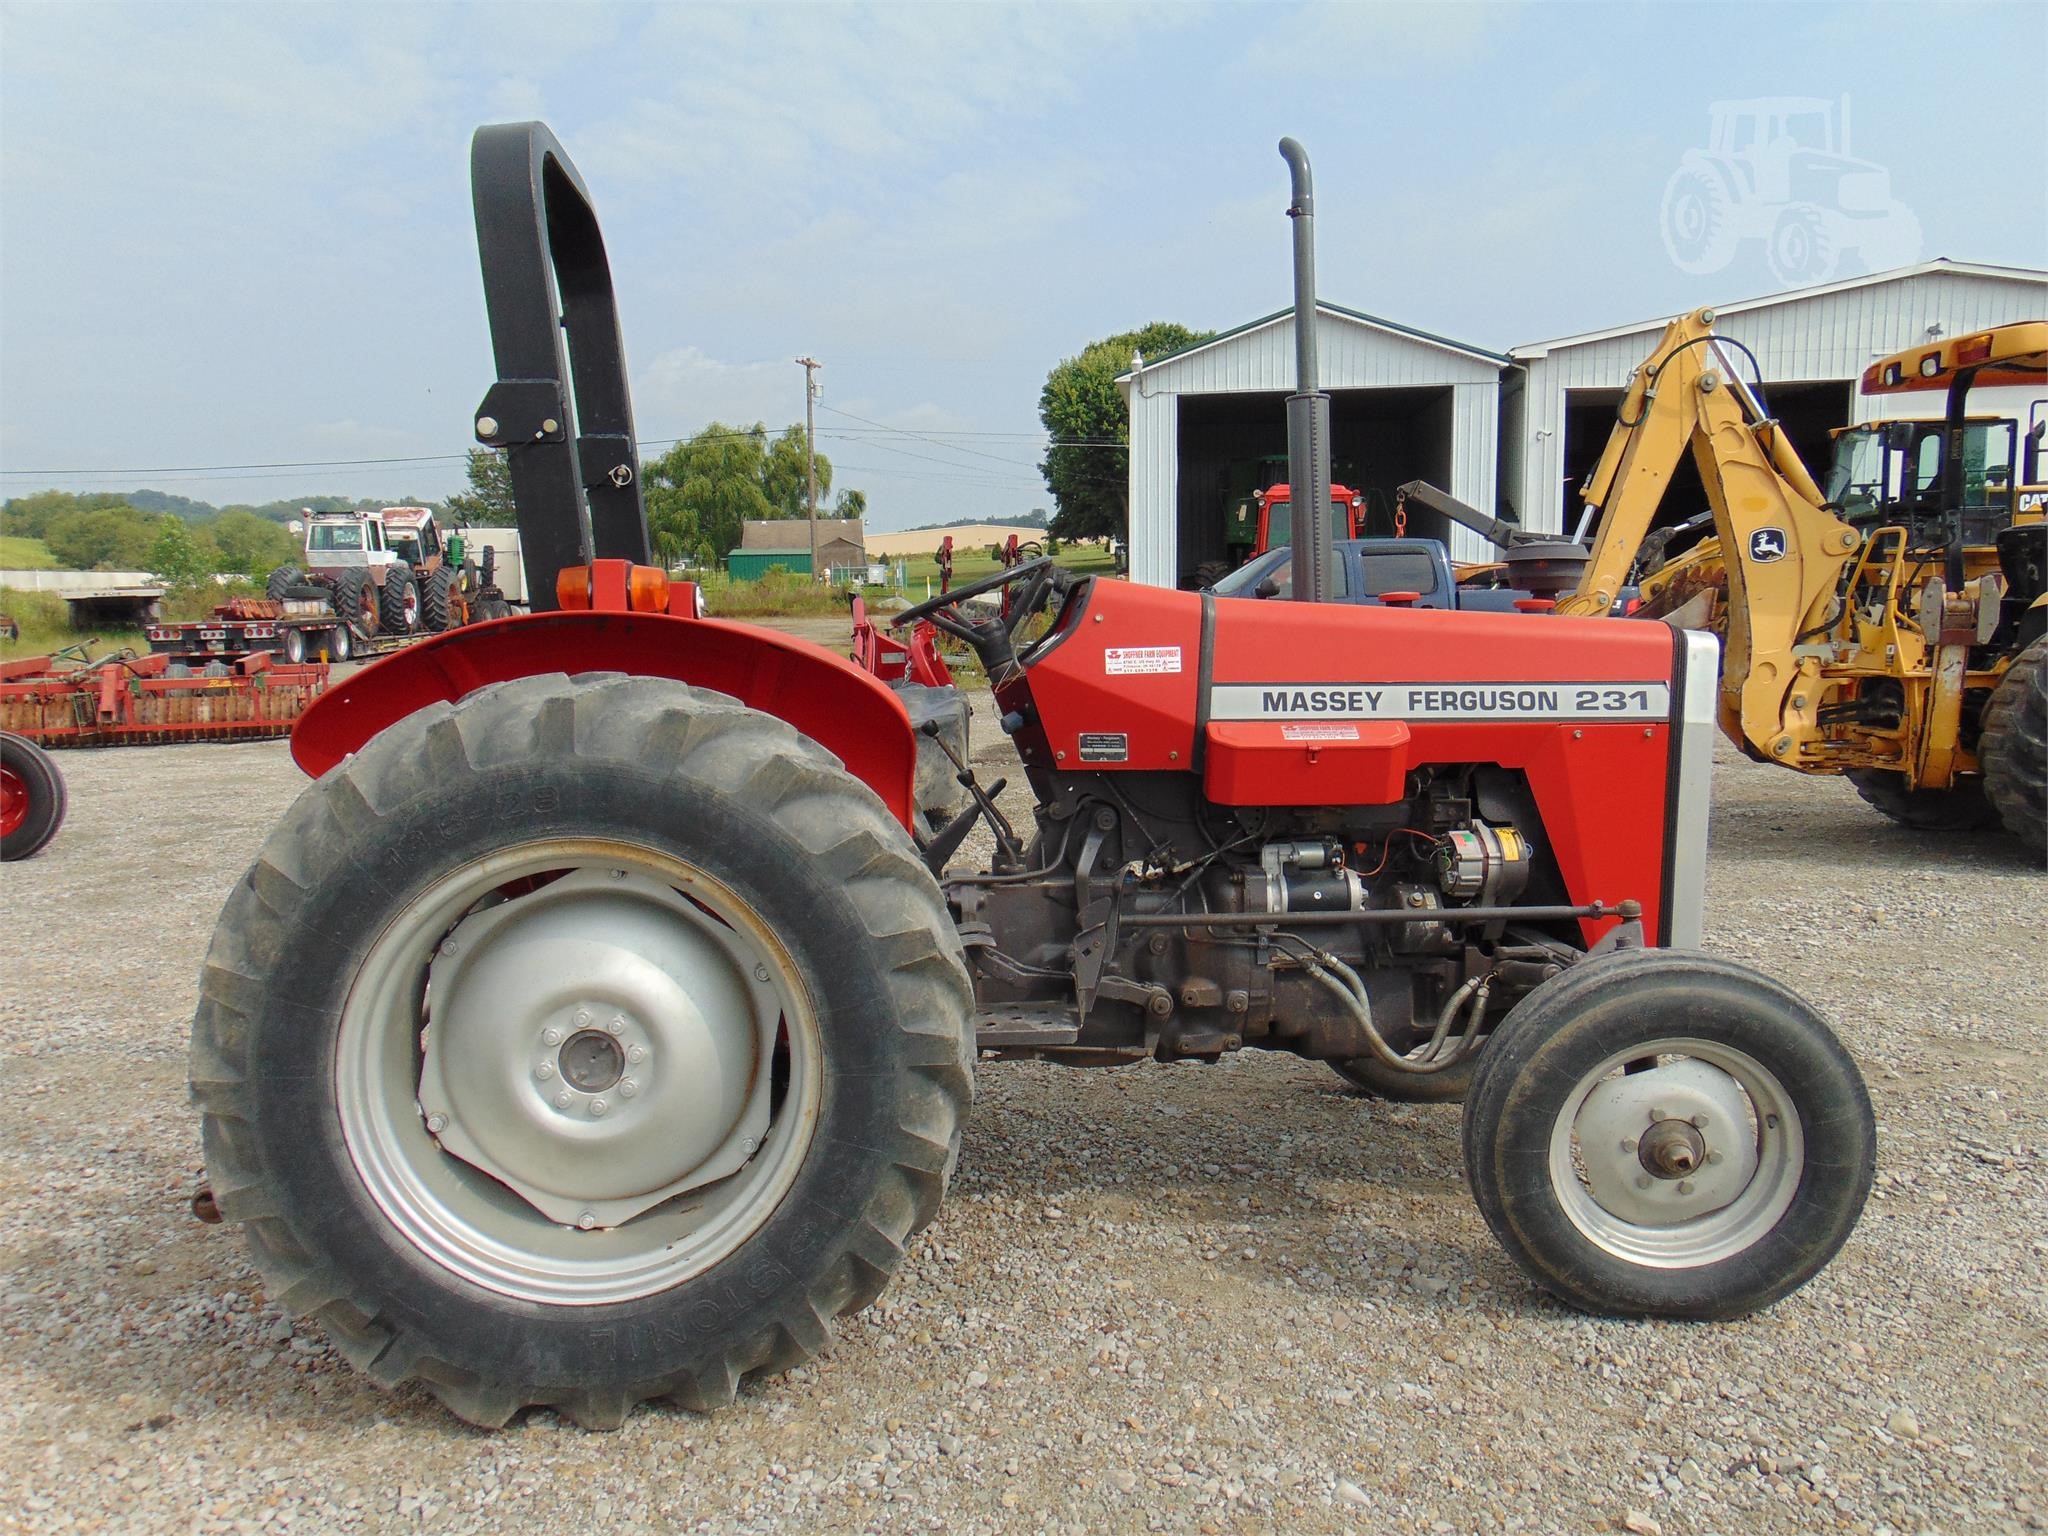 Massey Ferguson 231 For Sale 8 Listings Tractorhouse Com Page 1 Of 1